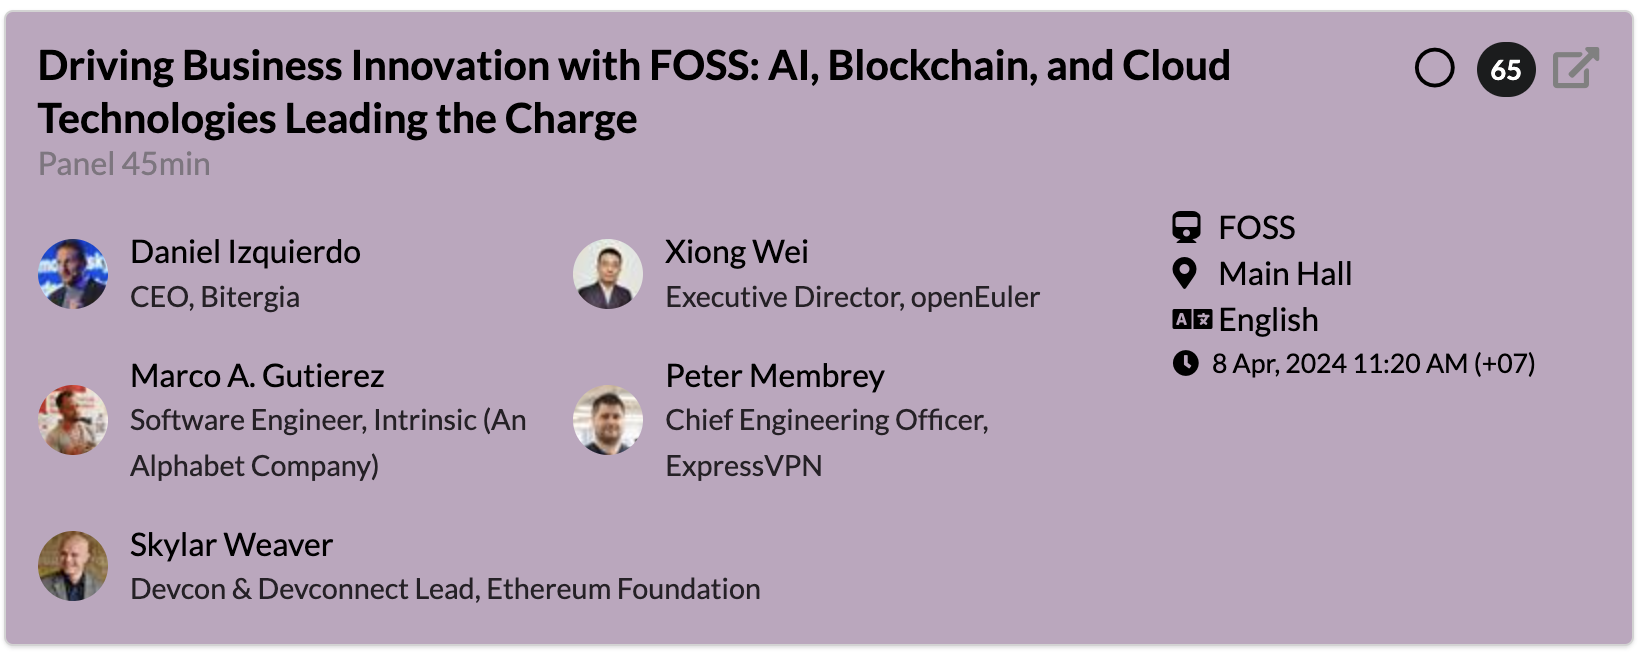 Driving Business Innovation with FOSS: AI, Blockchain, and Cloud Technologies Leading the Charge